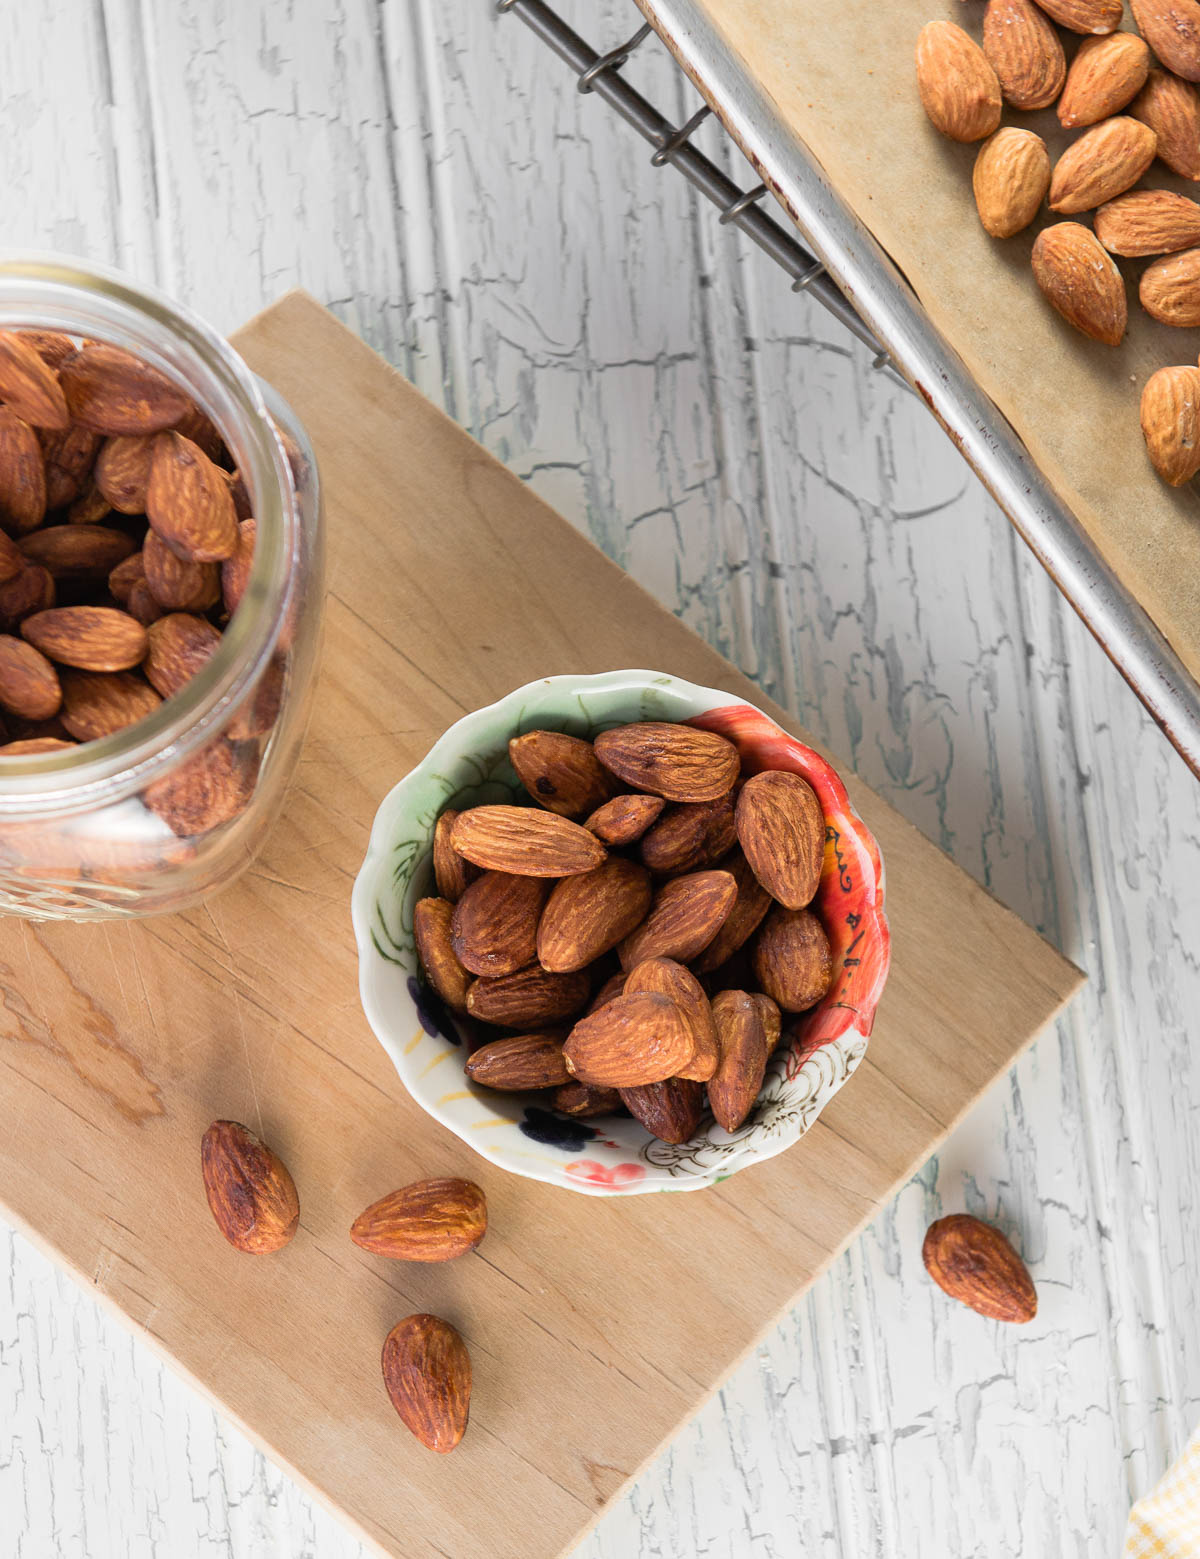 colorful snack bowl of roasted almonds recipe on a wooden cutting board.